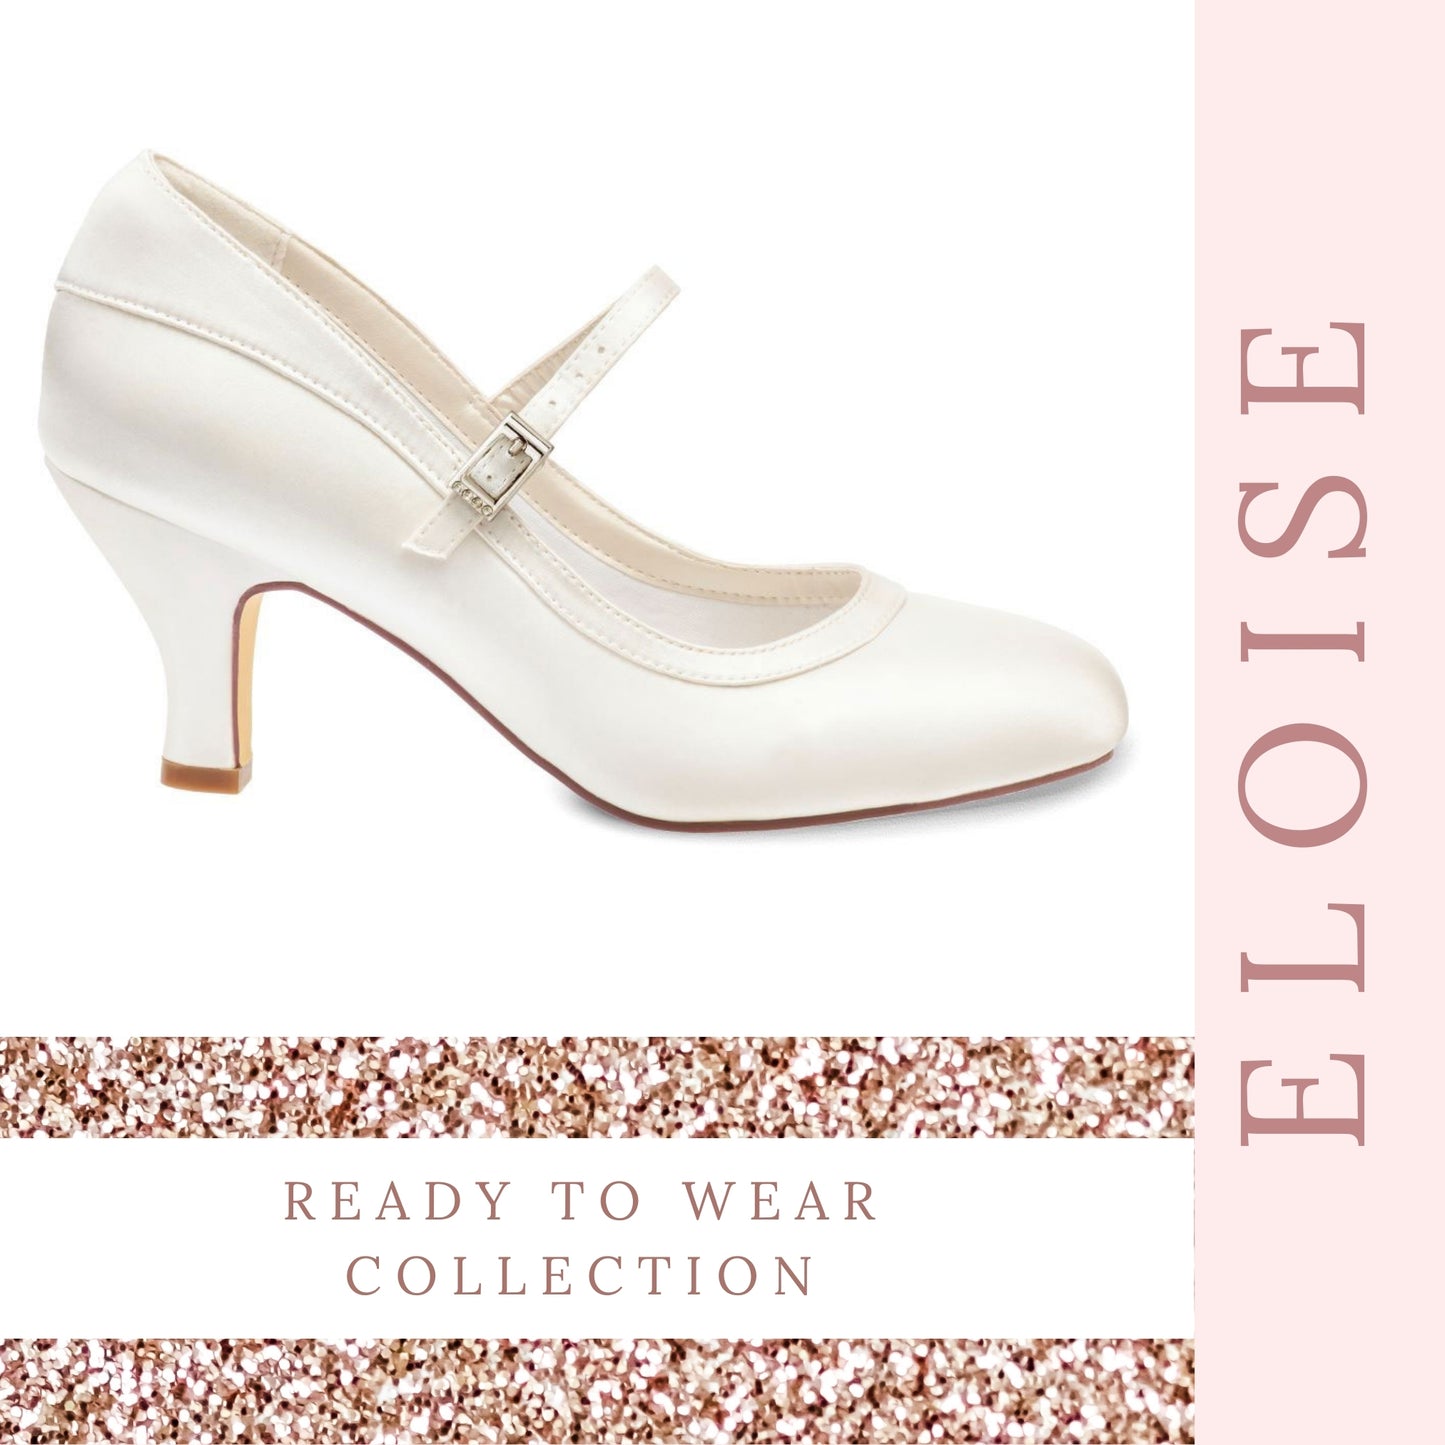 fifties-style-wedding-shoes